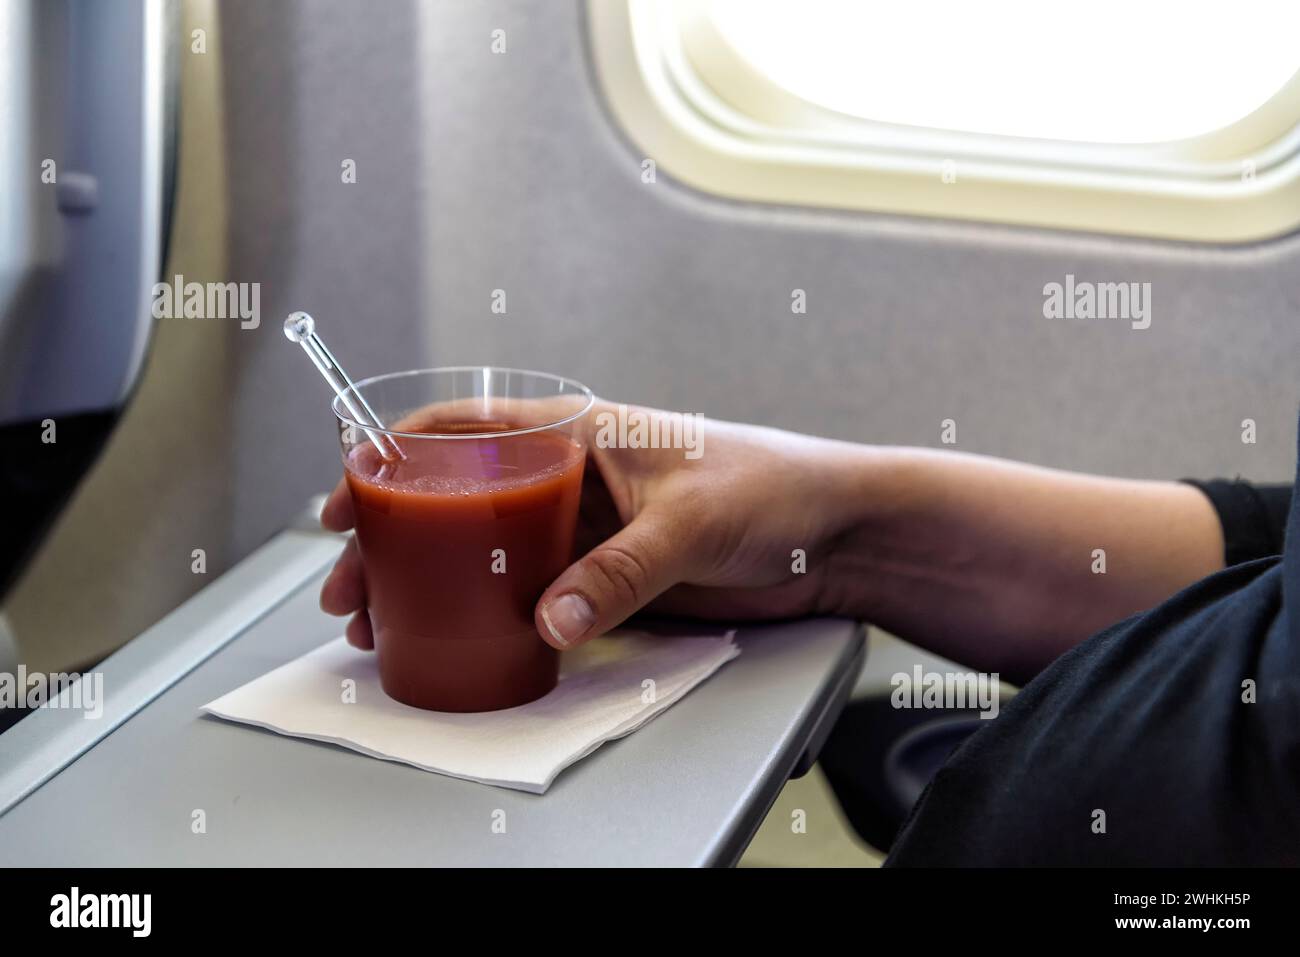 Tomato juice in an airplane Stock Photo